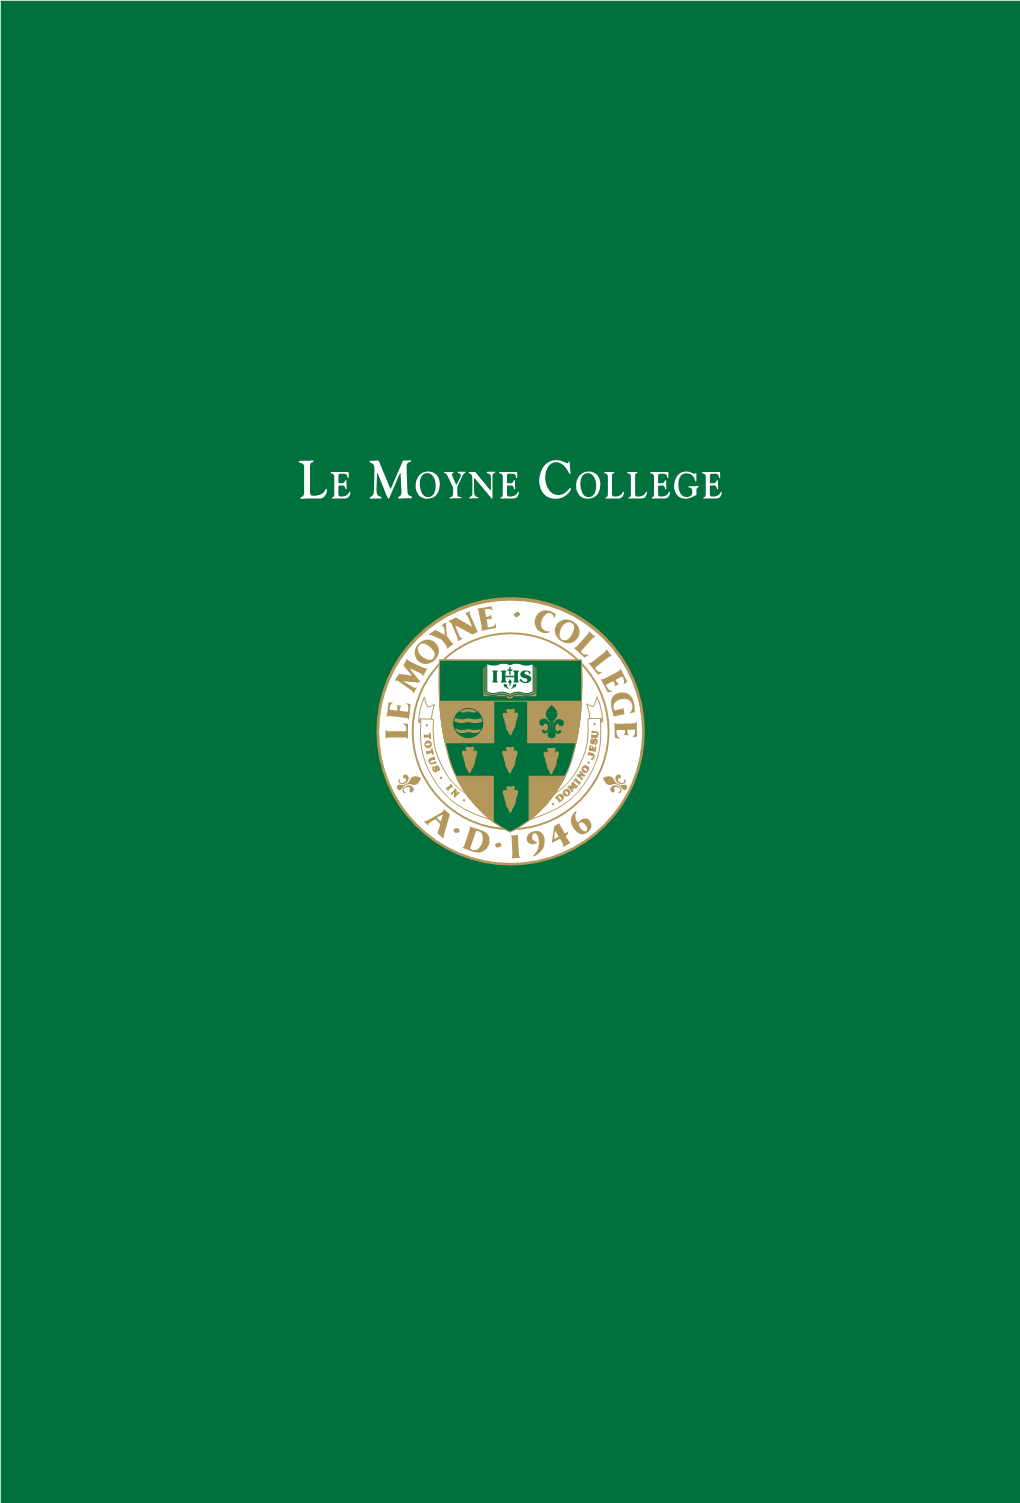 The Le Moyne College Green Book the Le Moyne College Green Book